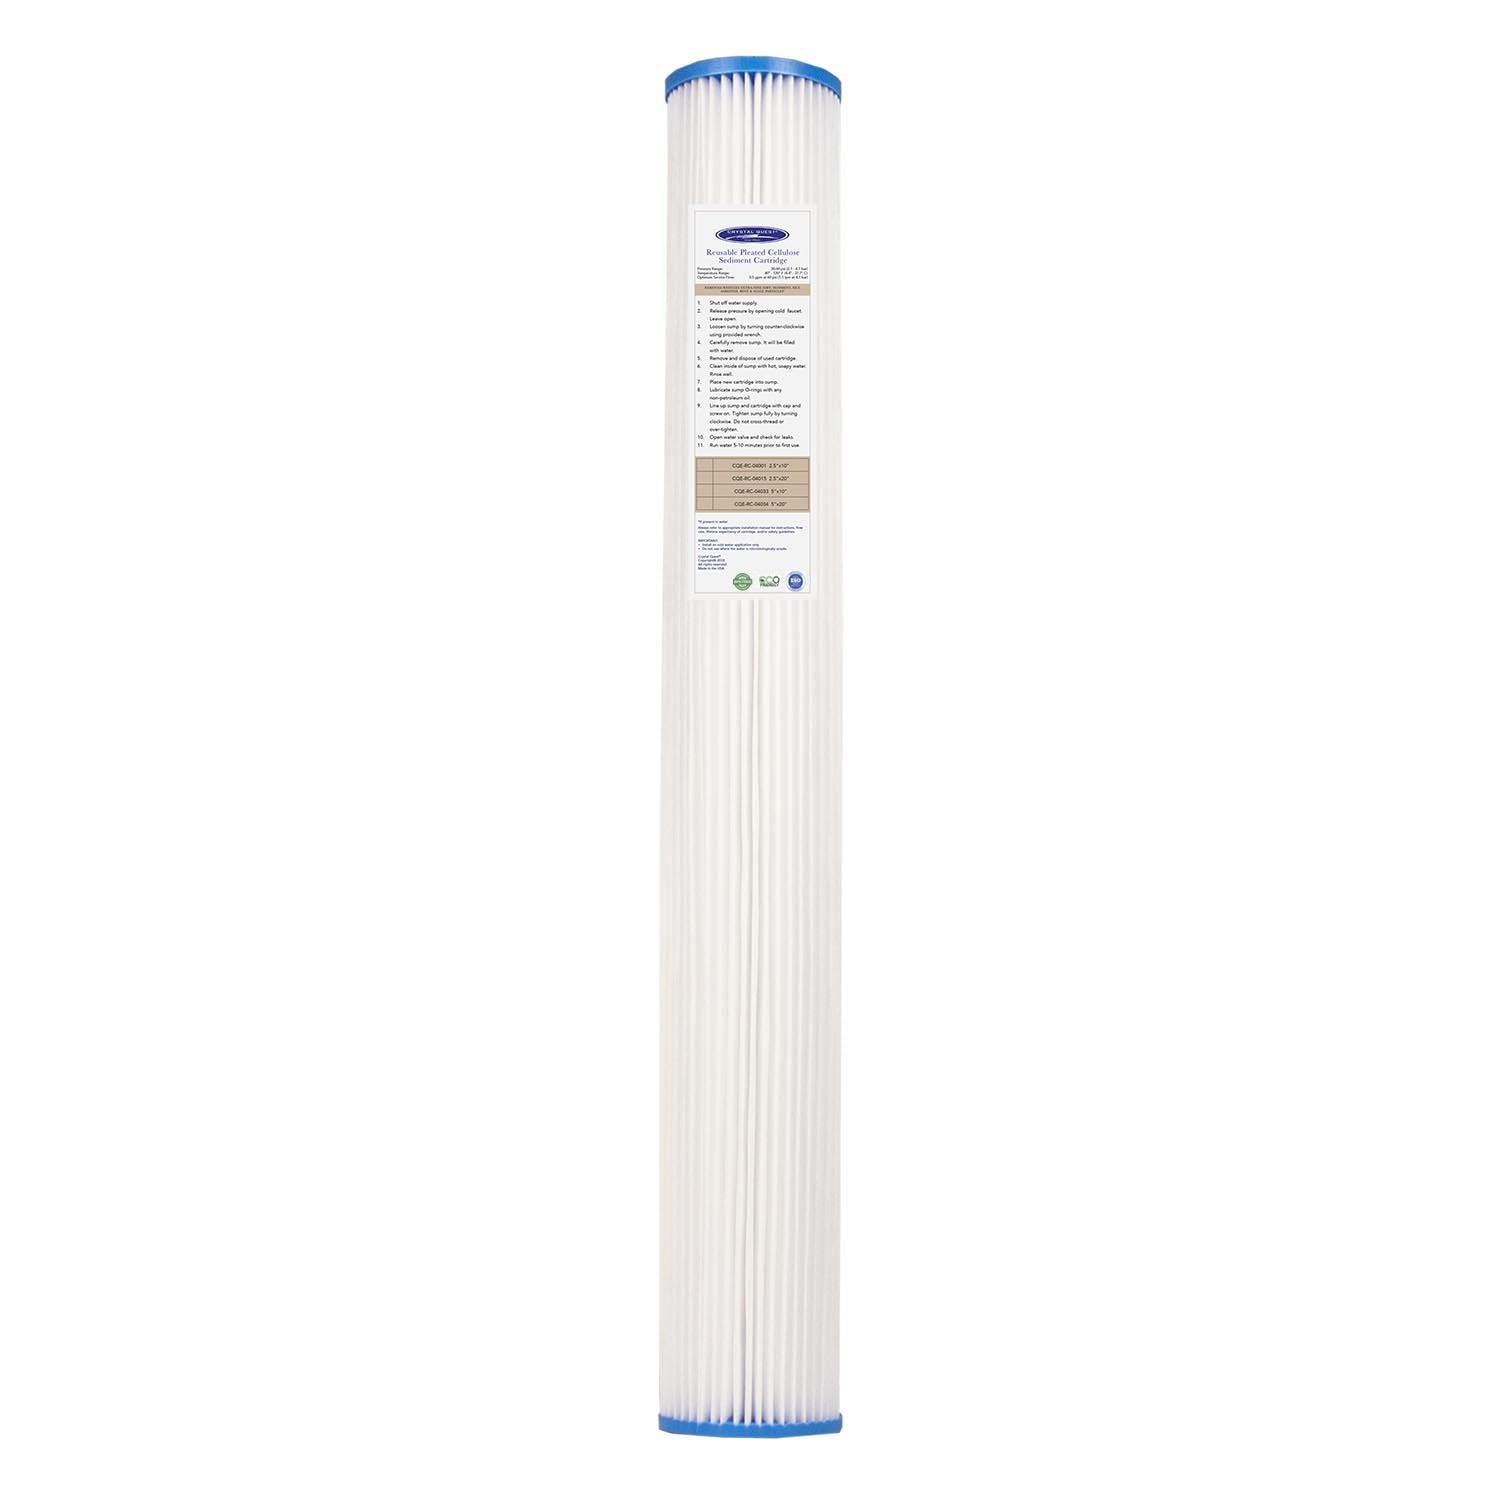 2-7/8” x 20” Pleated Cellulose Sediment Cartridge - Water Filter Cartridges - Crystal Quest